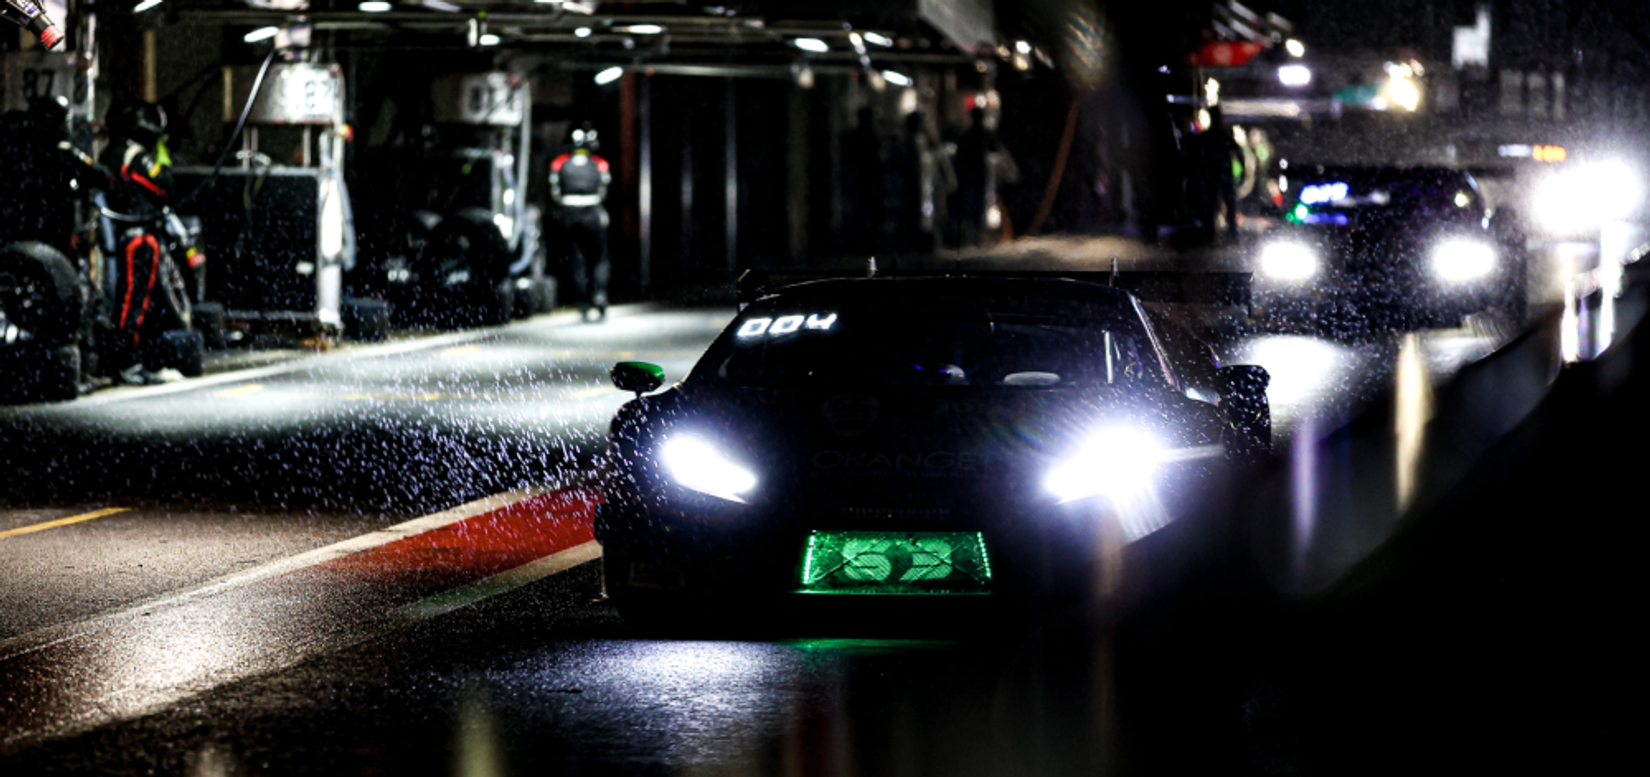 Racing cars in a dark and rainy pitlane in the Fanatec GT World Challenge Powered by AWS